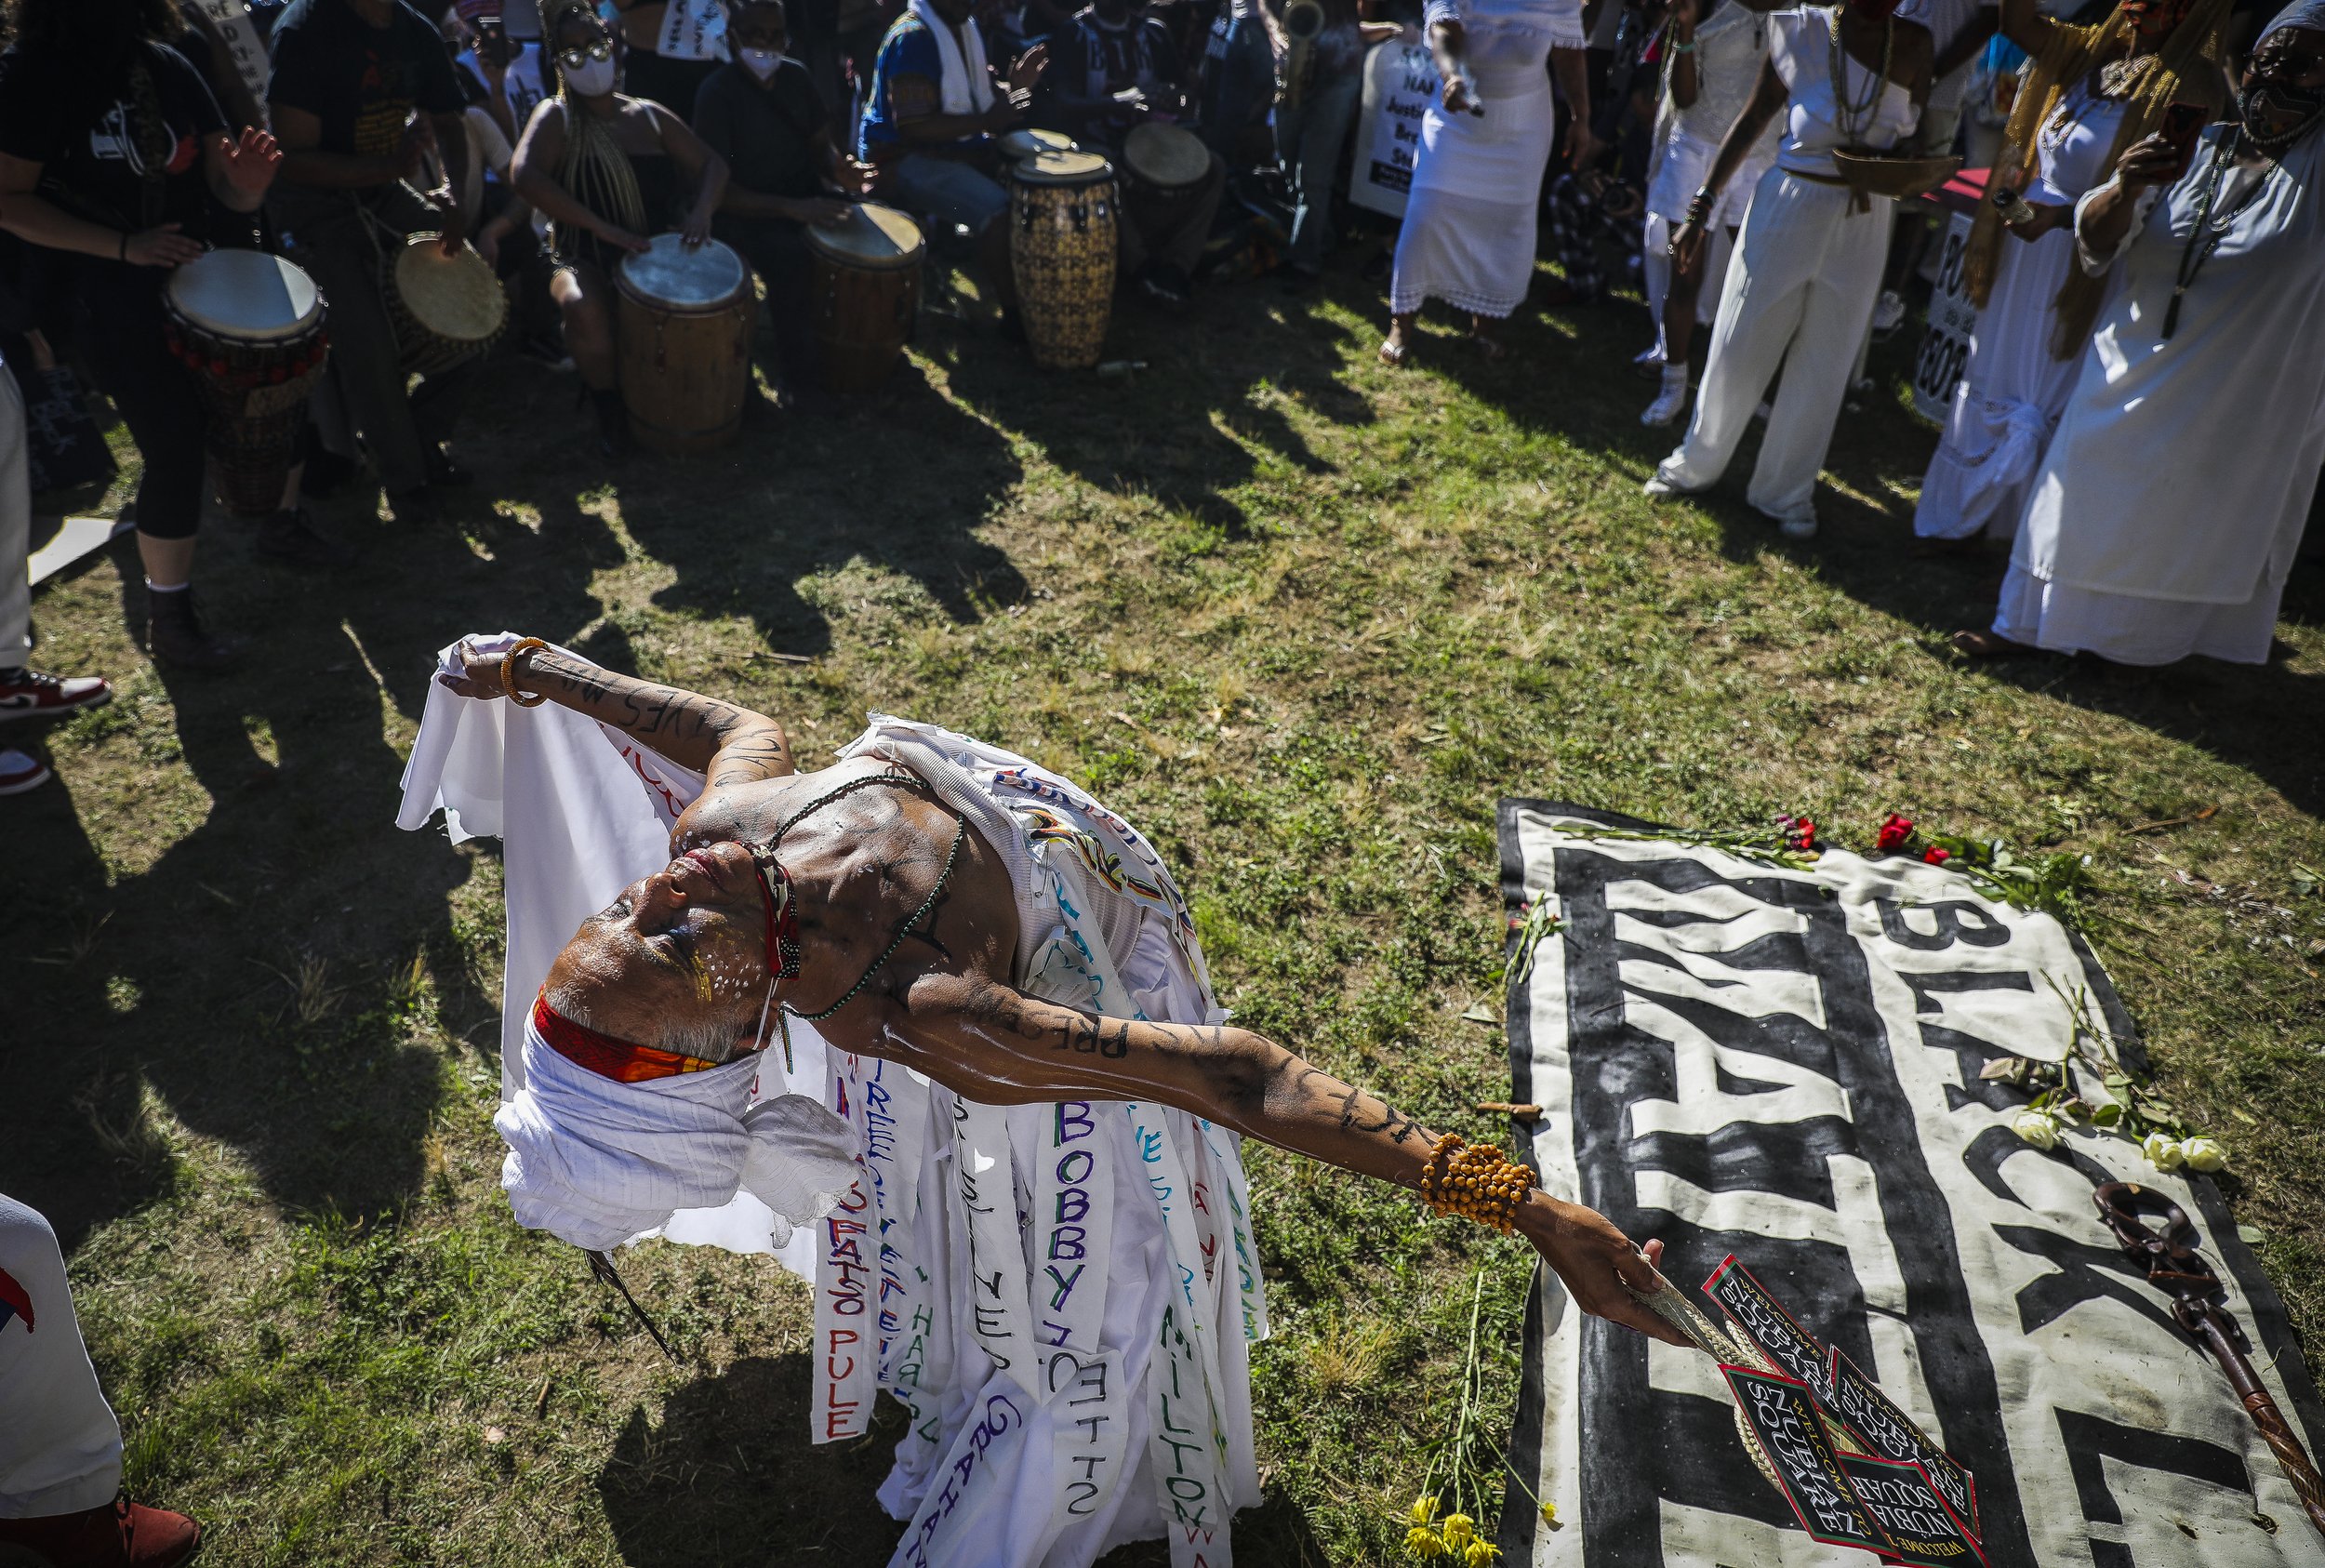  Isaura Oliveira dances while holding a sacred space for the Black women who have been slain by law enforcement. More than 1,000 people gathered Saturday afternoon to celebrate the lives of Black women and demand an end to police violence, with a mar